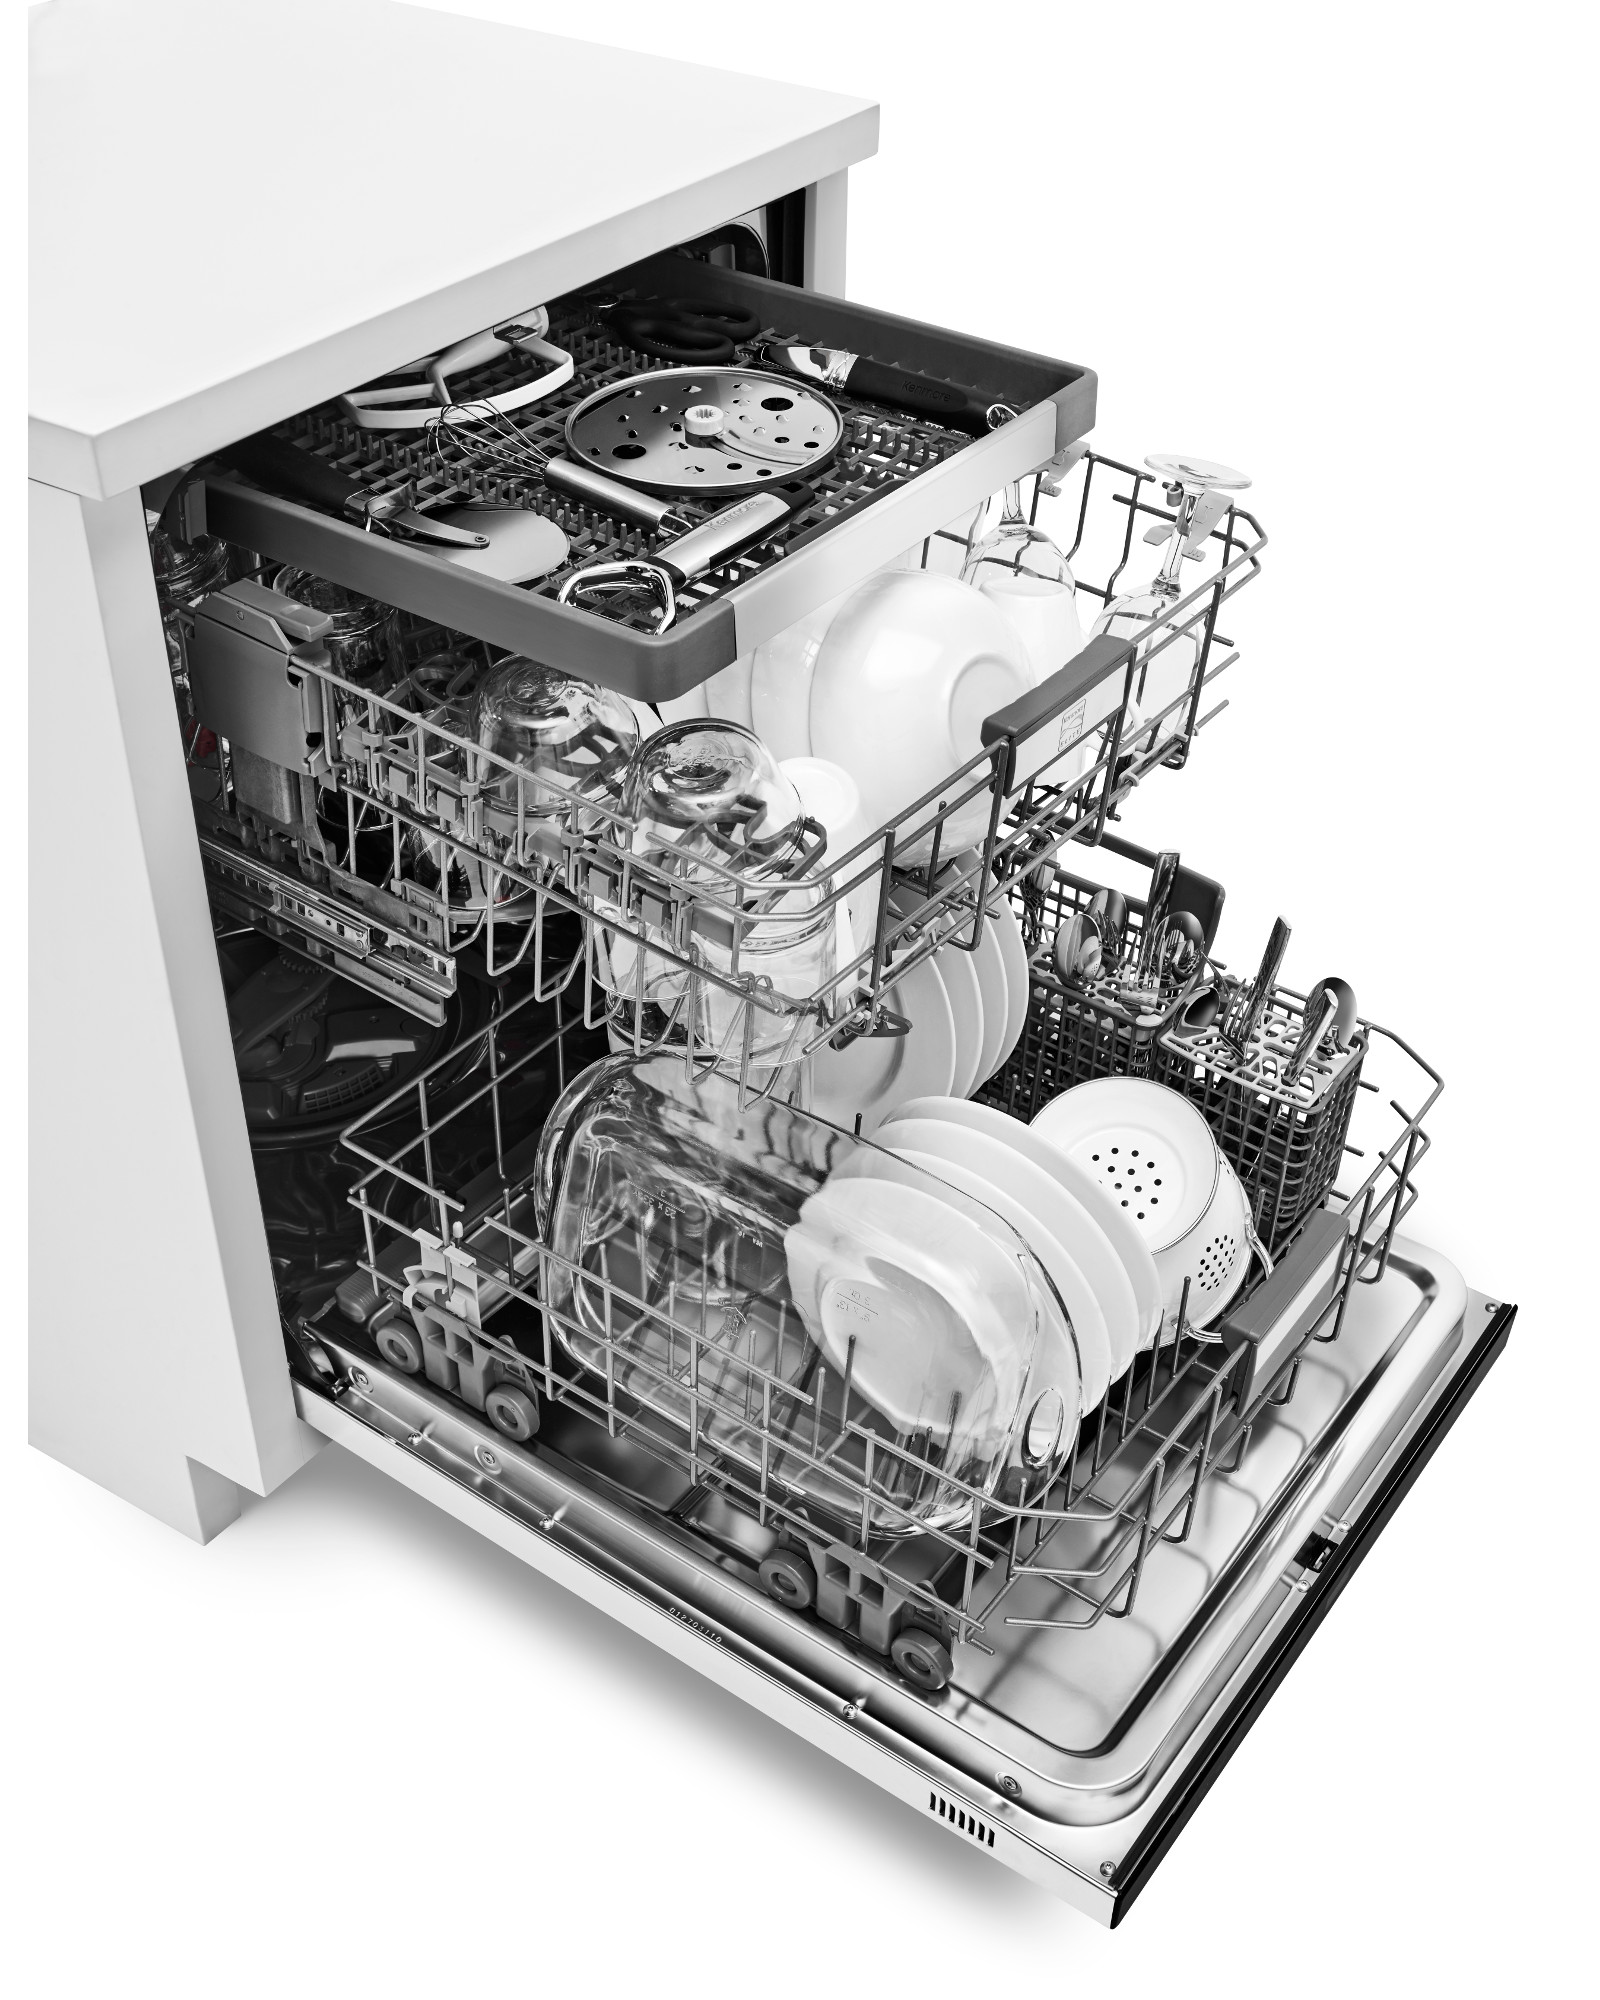 Kenmore Elite 14815 24 Built In Dishwasher With Micro Clean